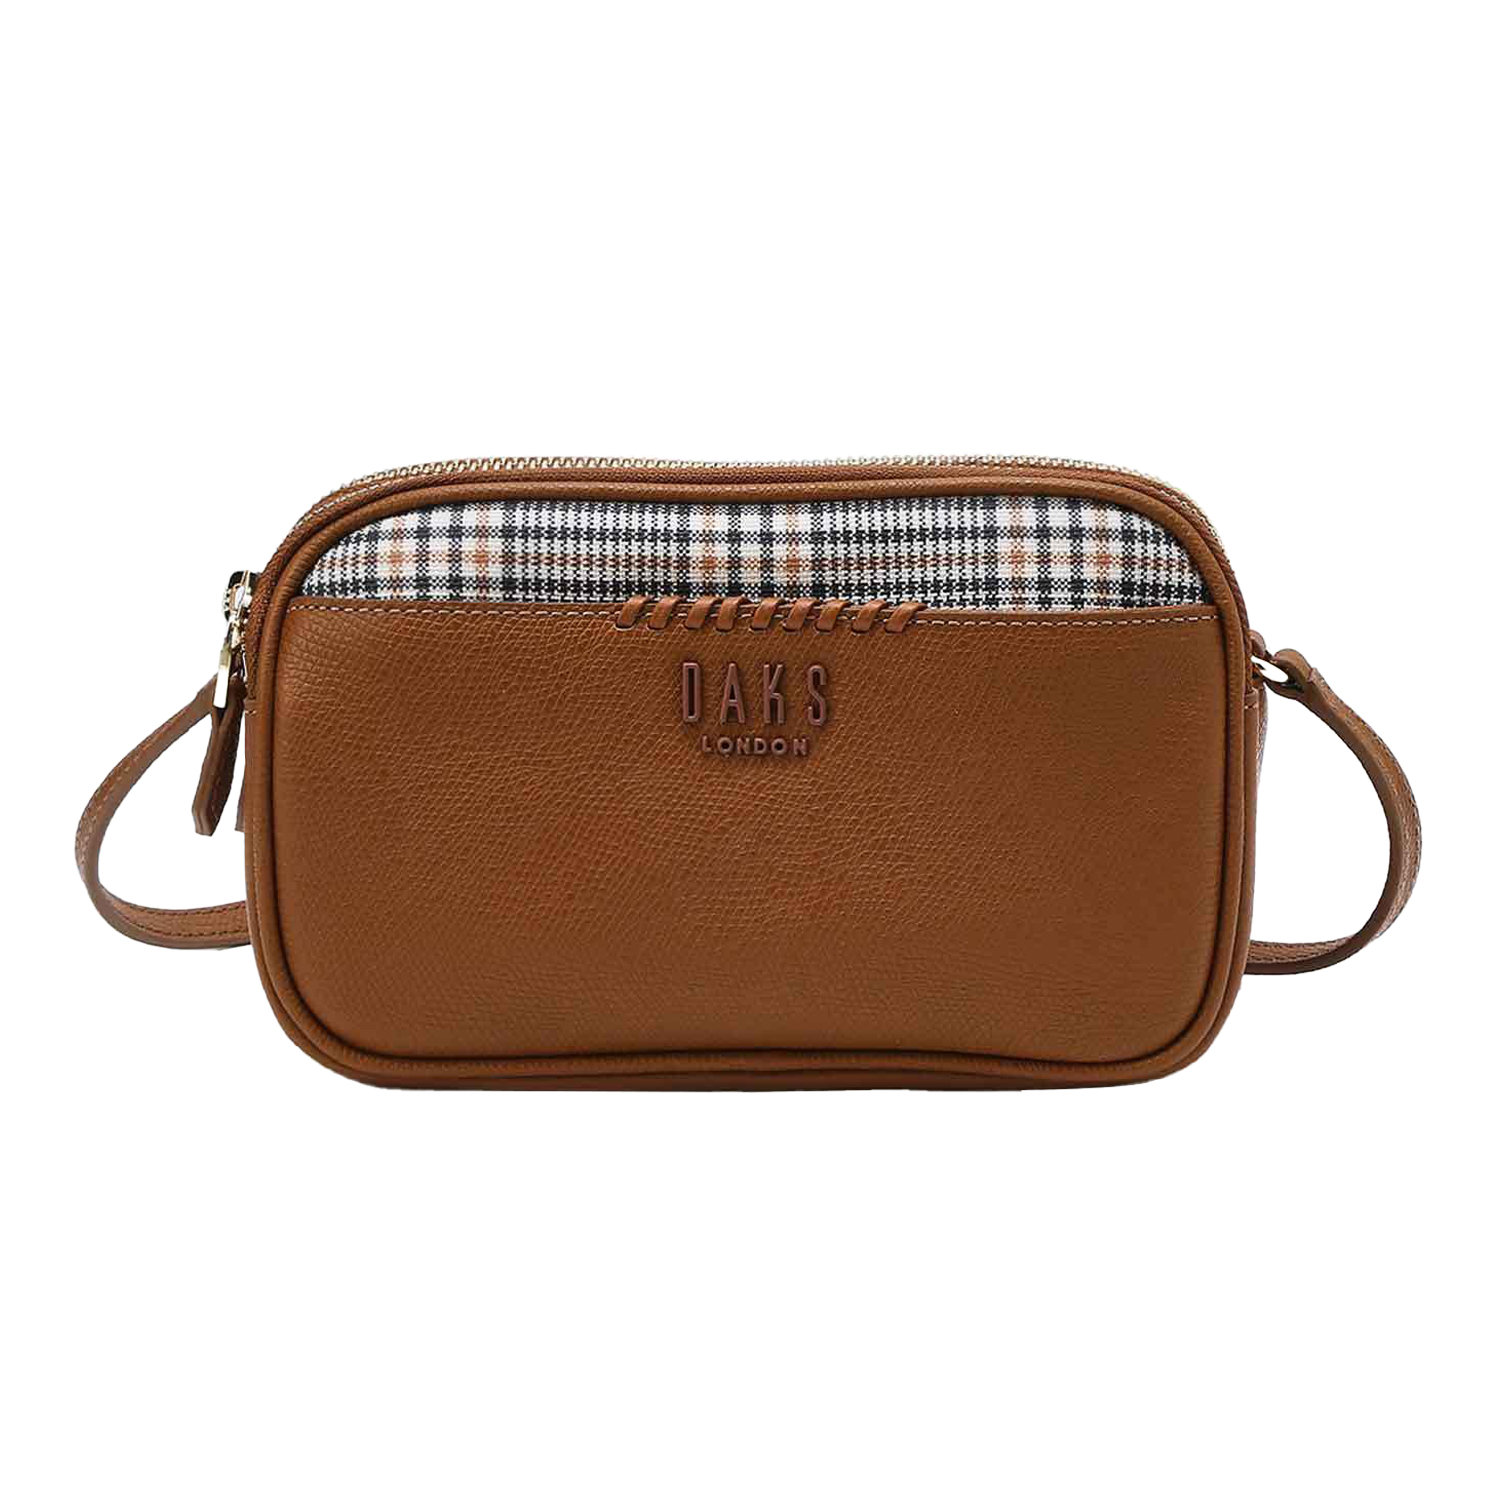 BROWN CHECK PATTERN LEATHER COMBINATION DOUBLE ZIPPER CROSSBODY BAG